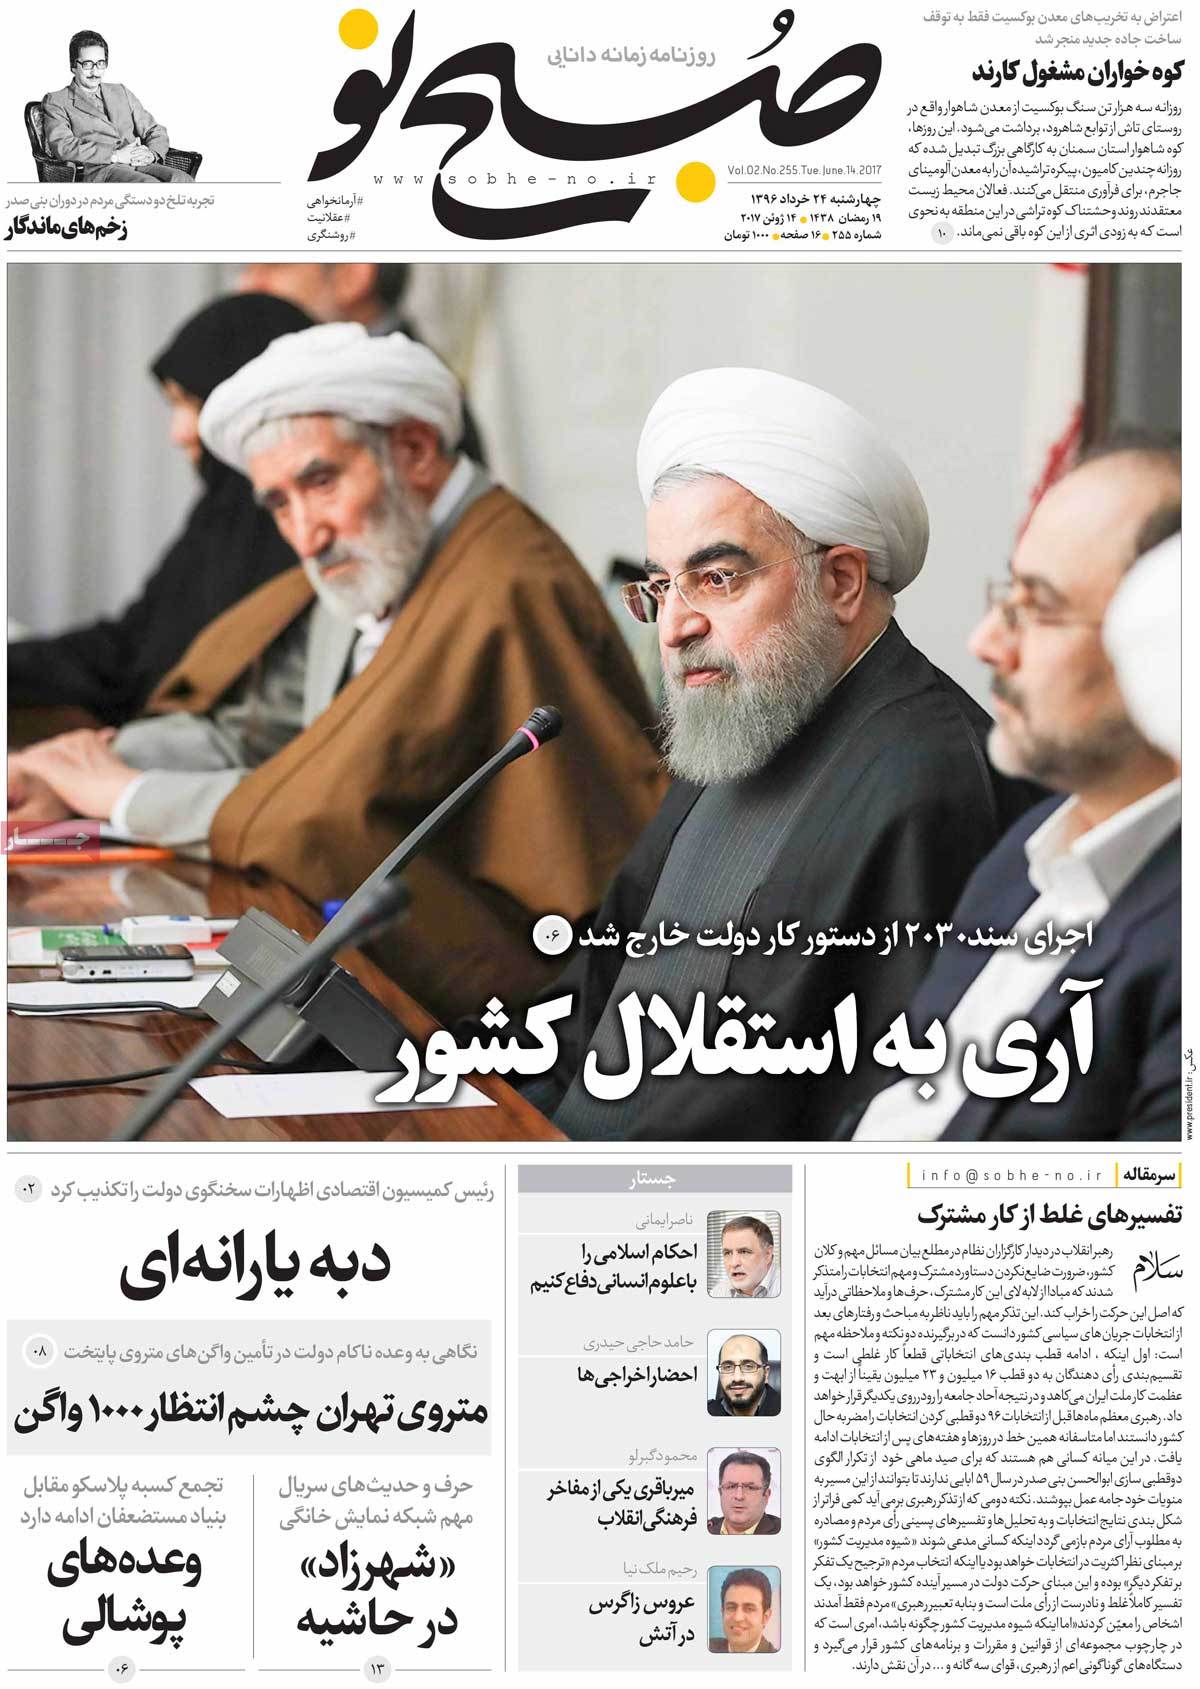 A Look at Iranian Newspaper Front Pages on June 14 -sobhe no